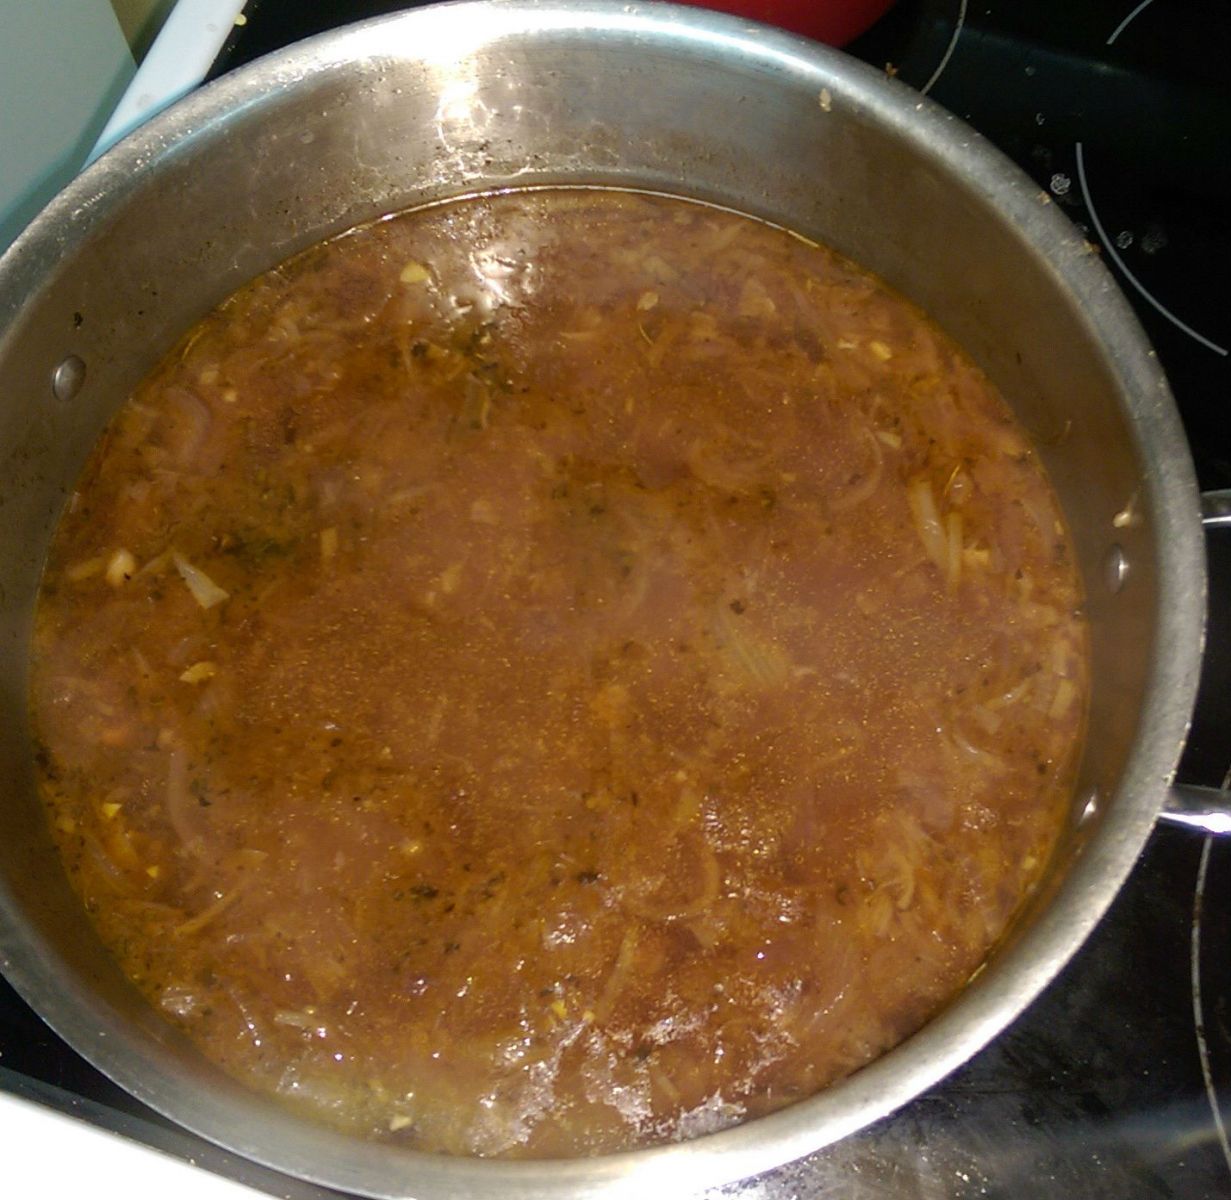 Broth added to onions